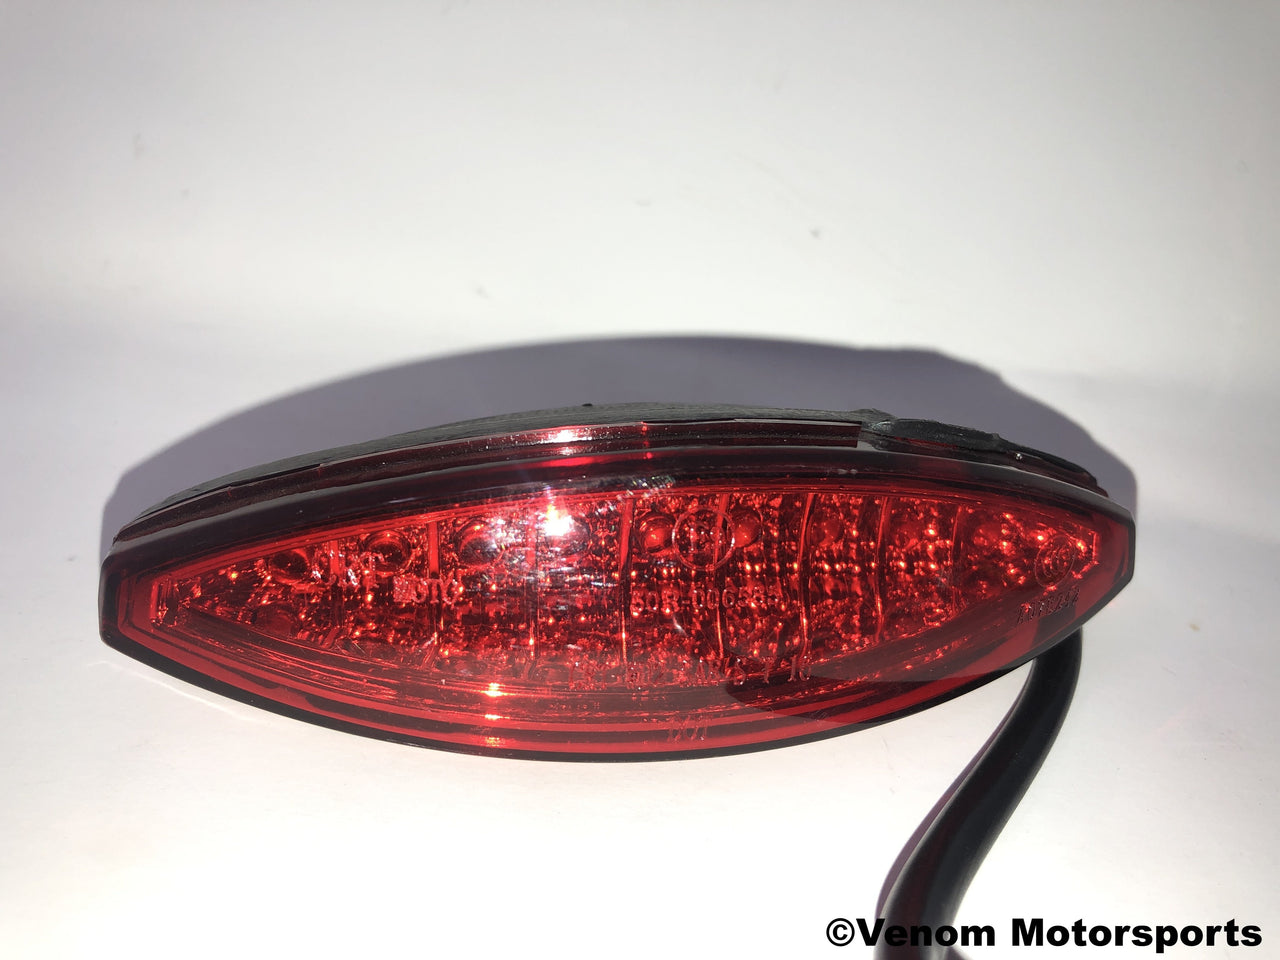 X18 50cc GY6 Motorcycle | Tail Light (09030050)